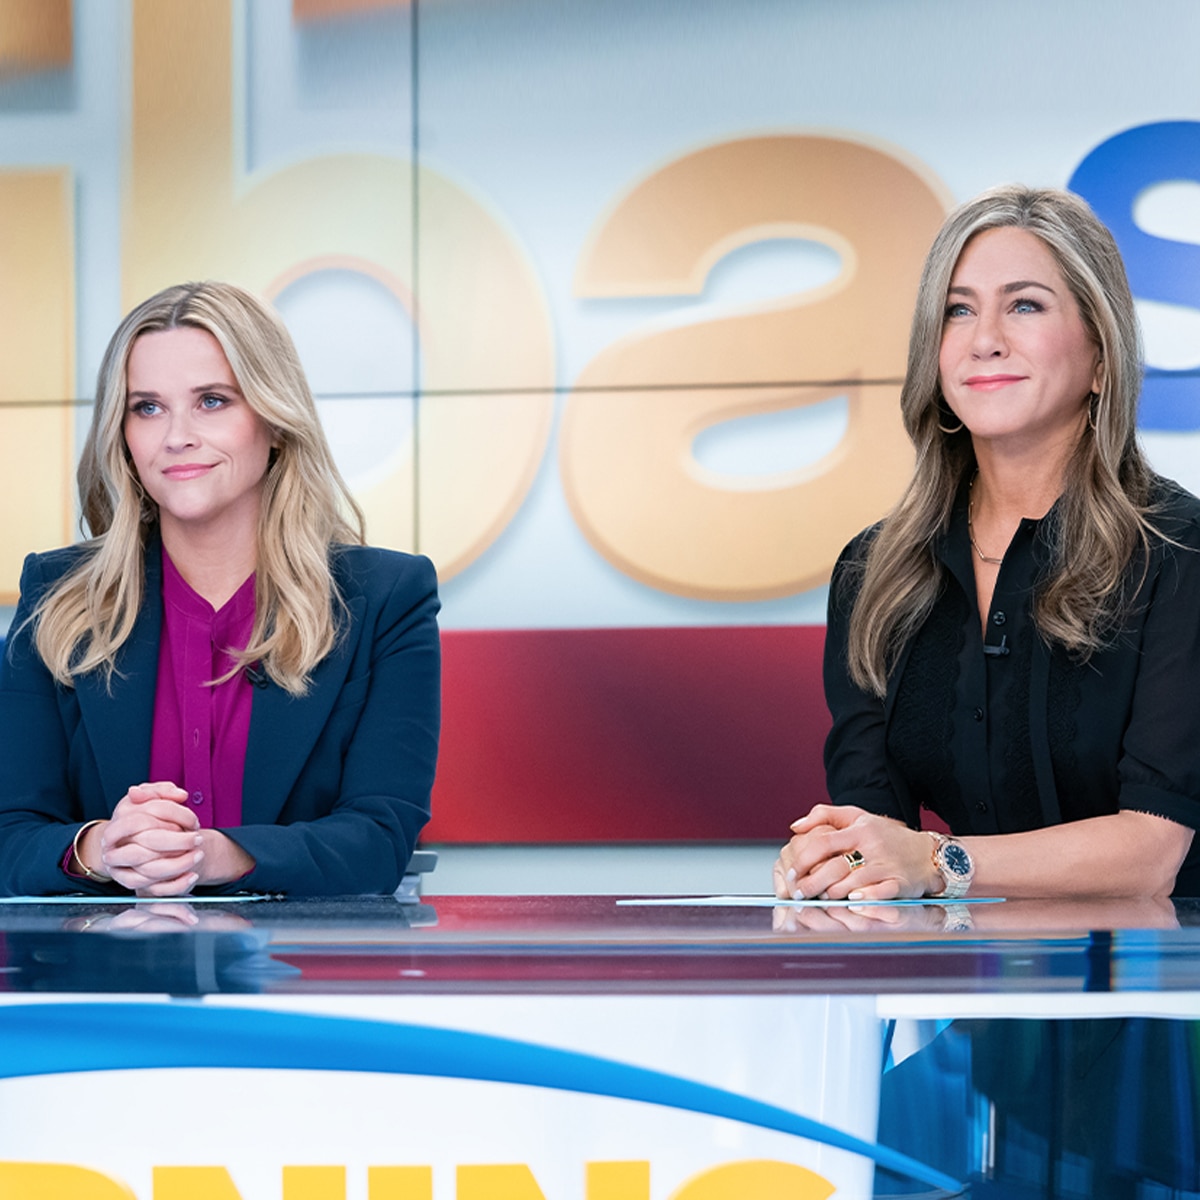 Reese Witherspoon and Jennifer Aniston, The Morning Show, Apple TV+